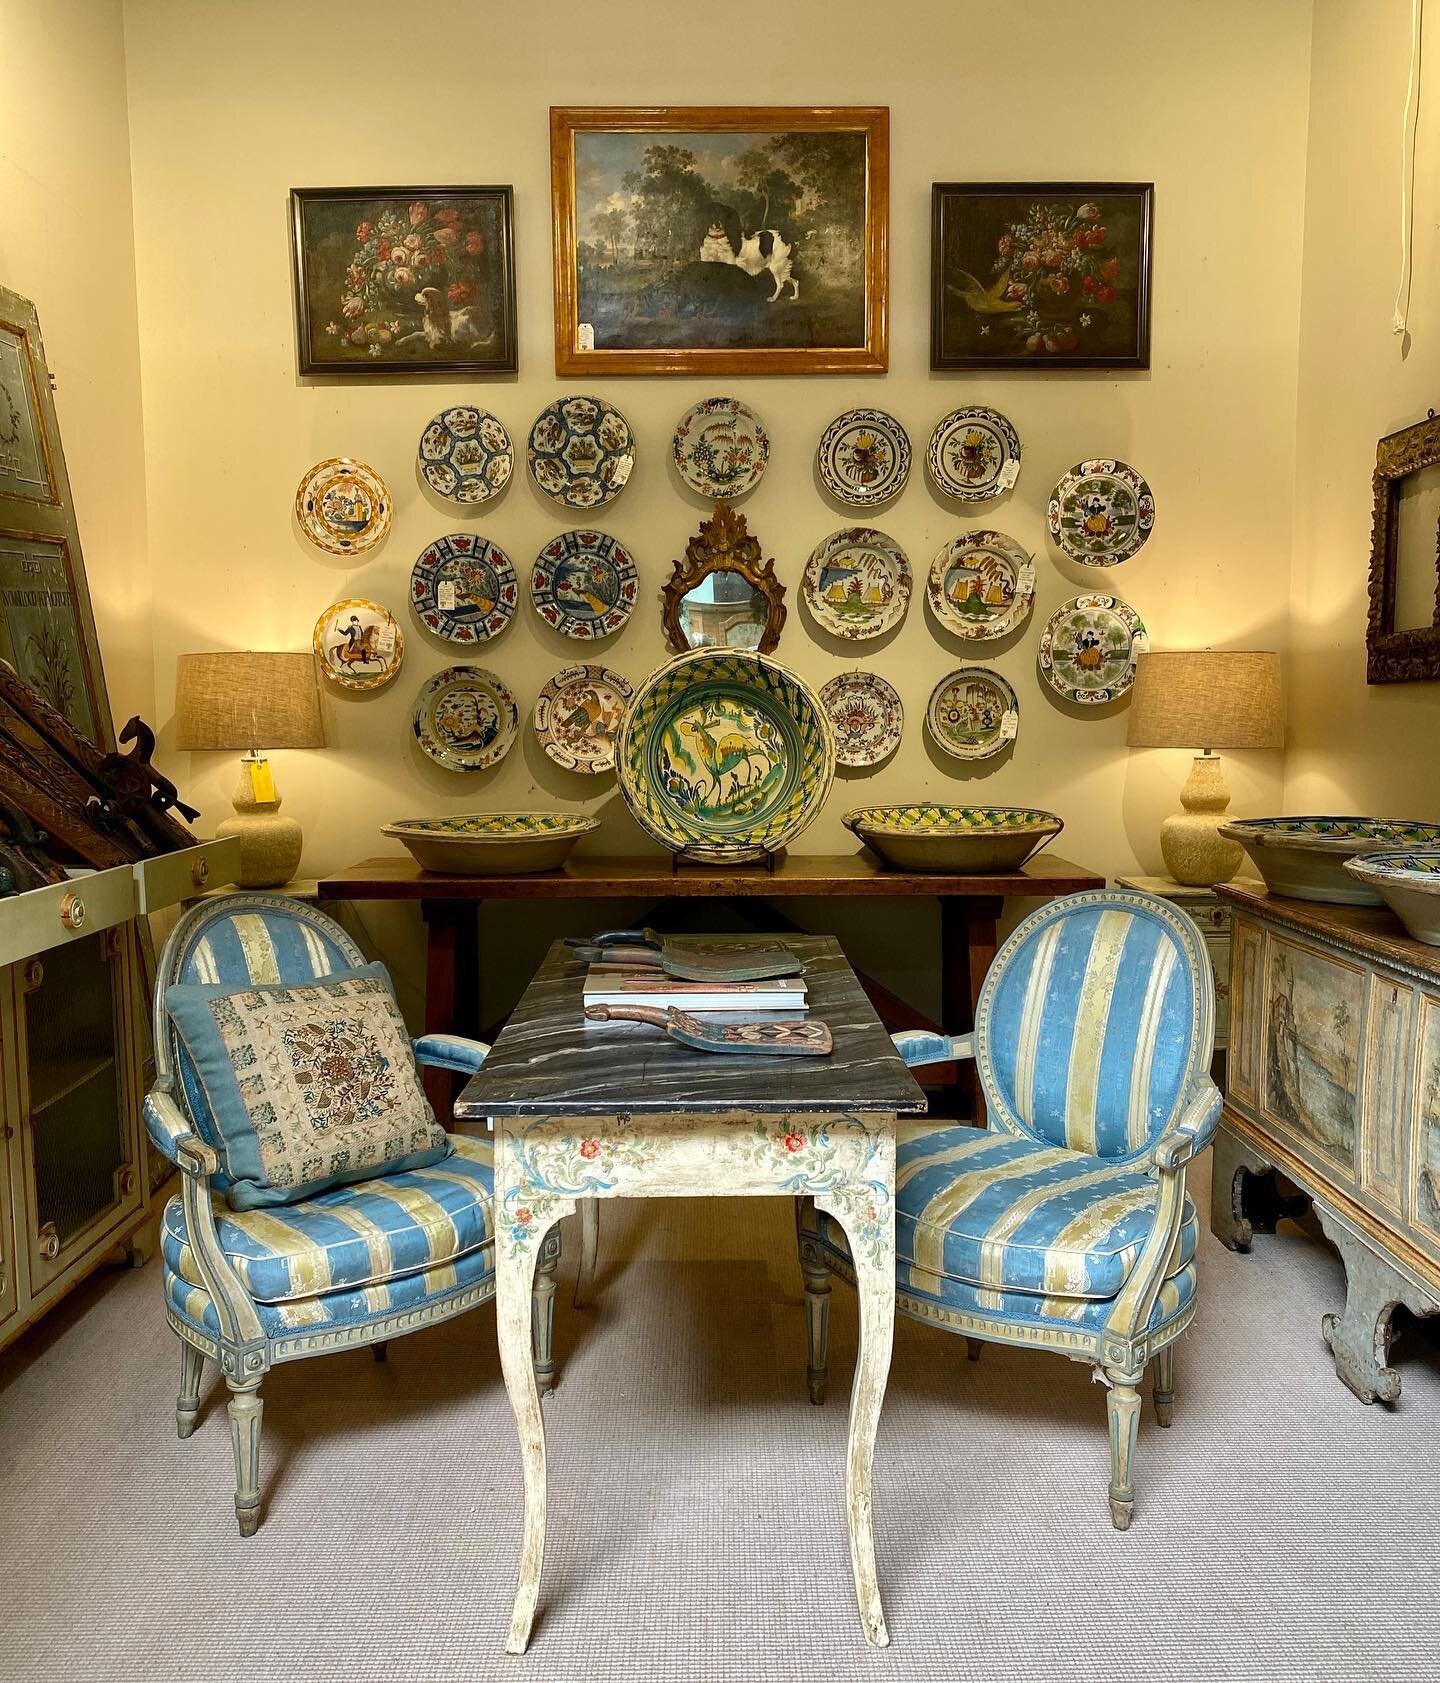 18th and 19th century accessories from across Europe at Wolf Hall😍
.
.
.
#wolfhall #wolfhallantiques #antiquedealersofinstagram #antique #dallasinteriordesigner #dallasdesigndistrict #texasinteriordesigner #antiqueshop #fineantiques #timelessdesign 